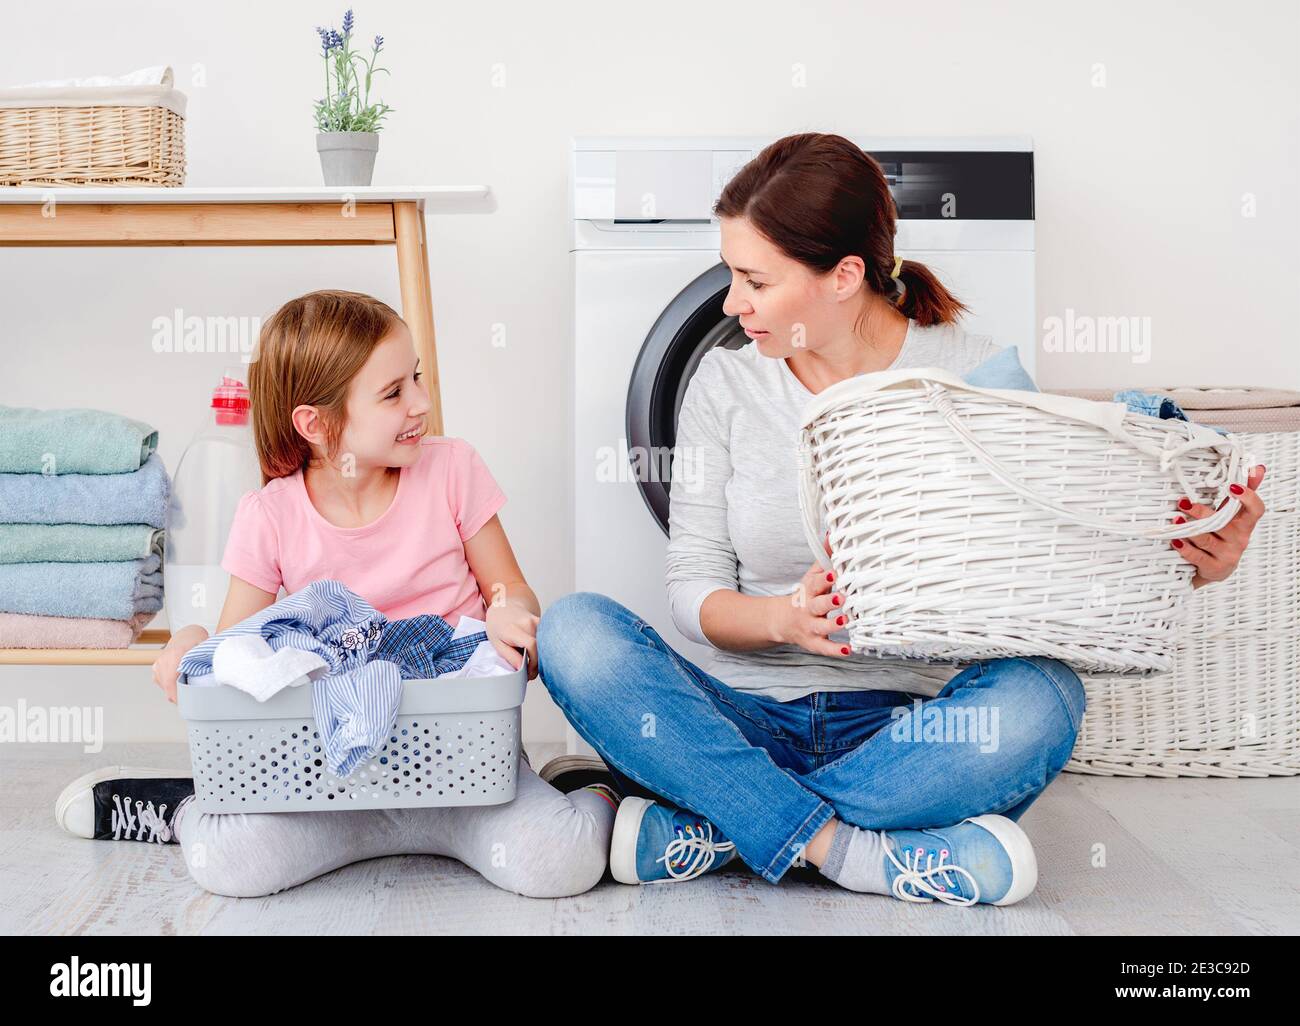 Little girl helping mother during washing Stock Photo